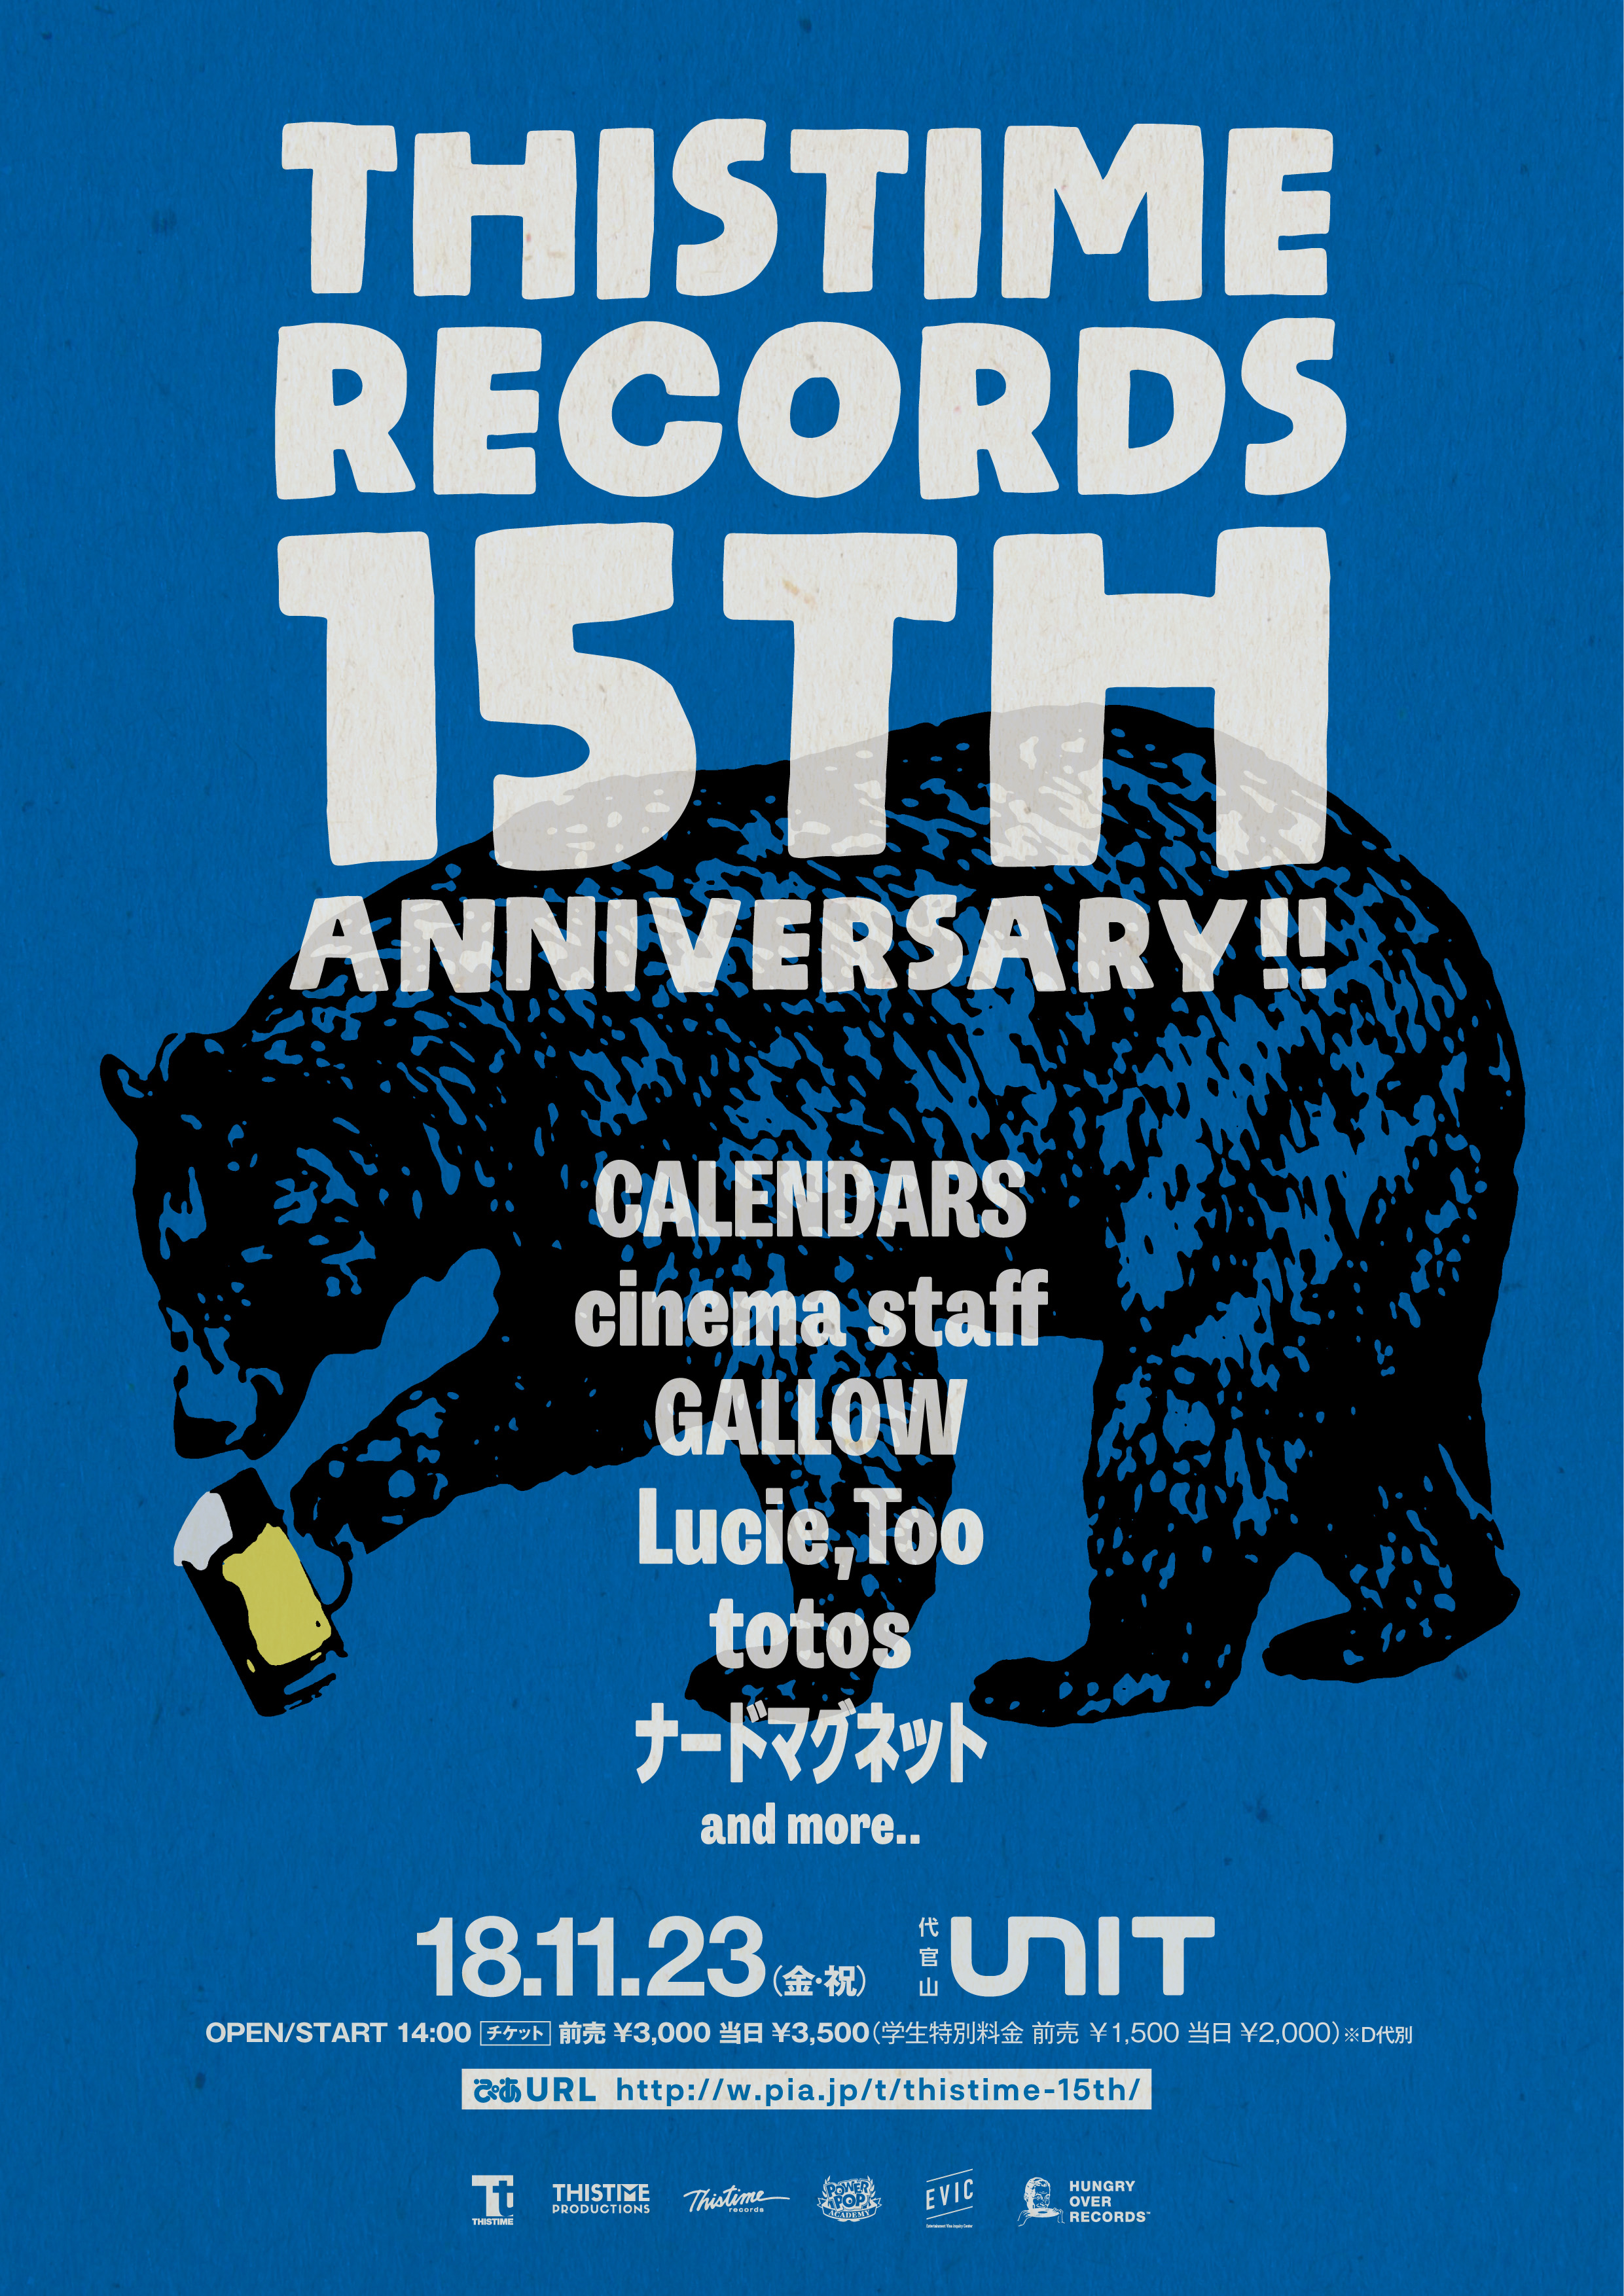  THISTIME RECORDS 15TH ANNIVERSARY !!